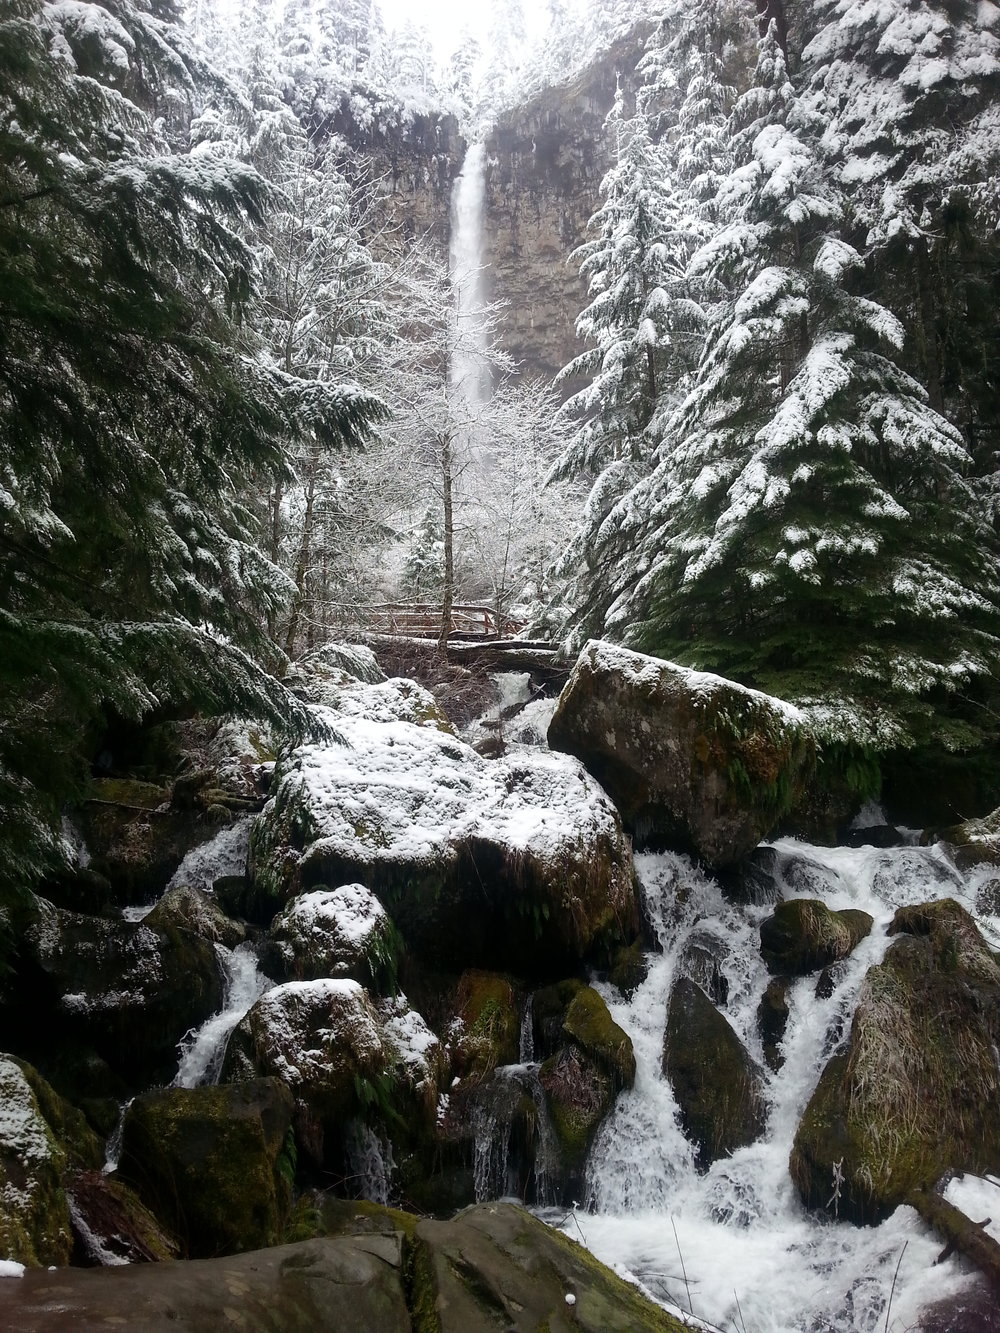 WATSON FALLS - Waterfalls - What to do in Southern Oregon - Things to do - Hikes - Kids